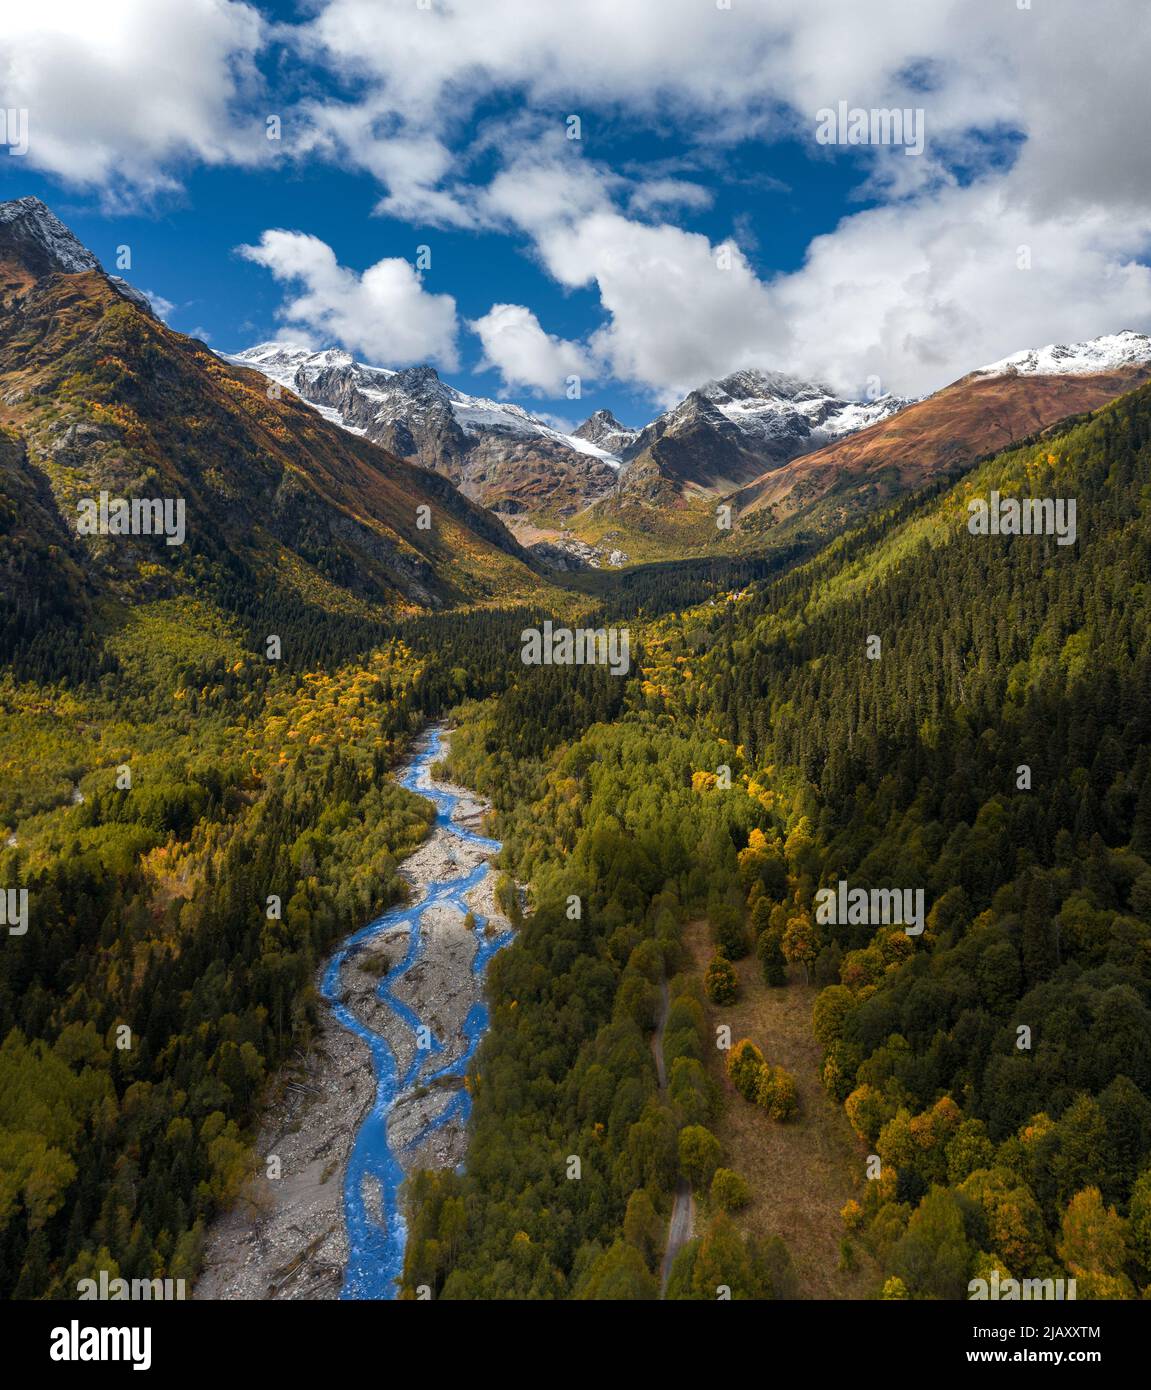 drone view of a beautiful flowing mountain river with a view of the mountain Stock Photo